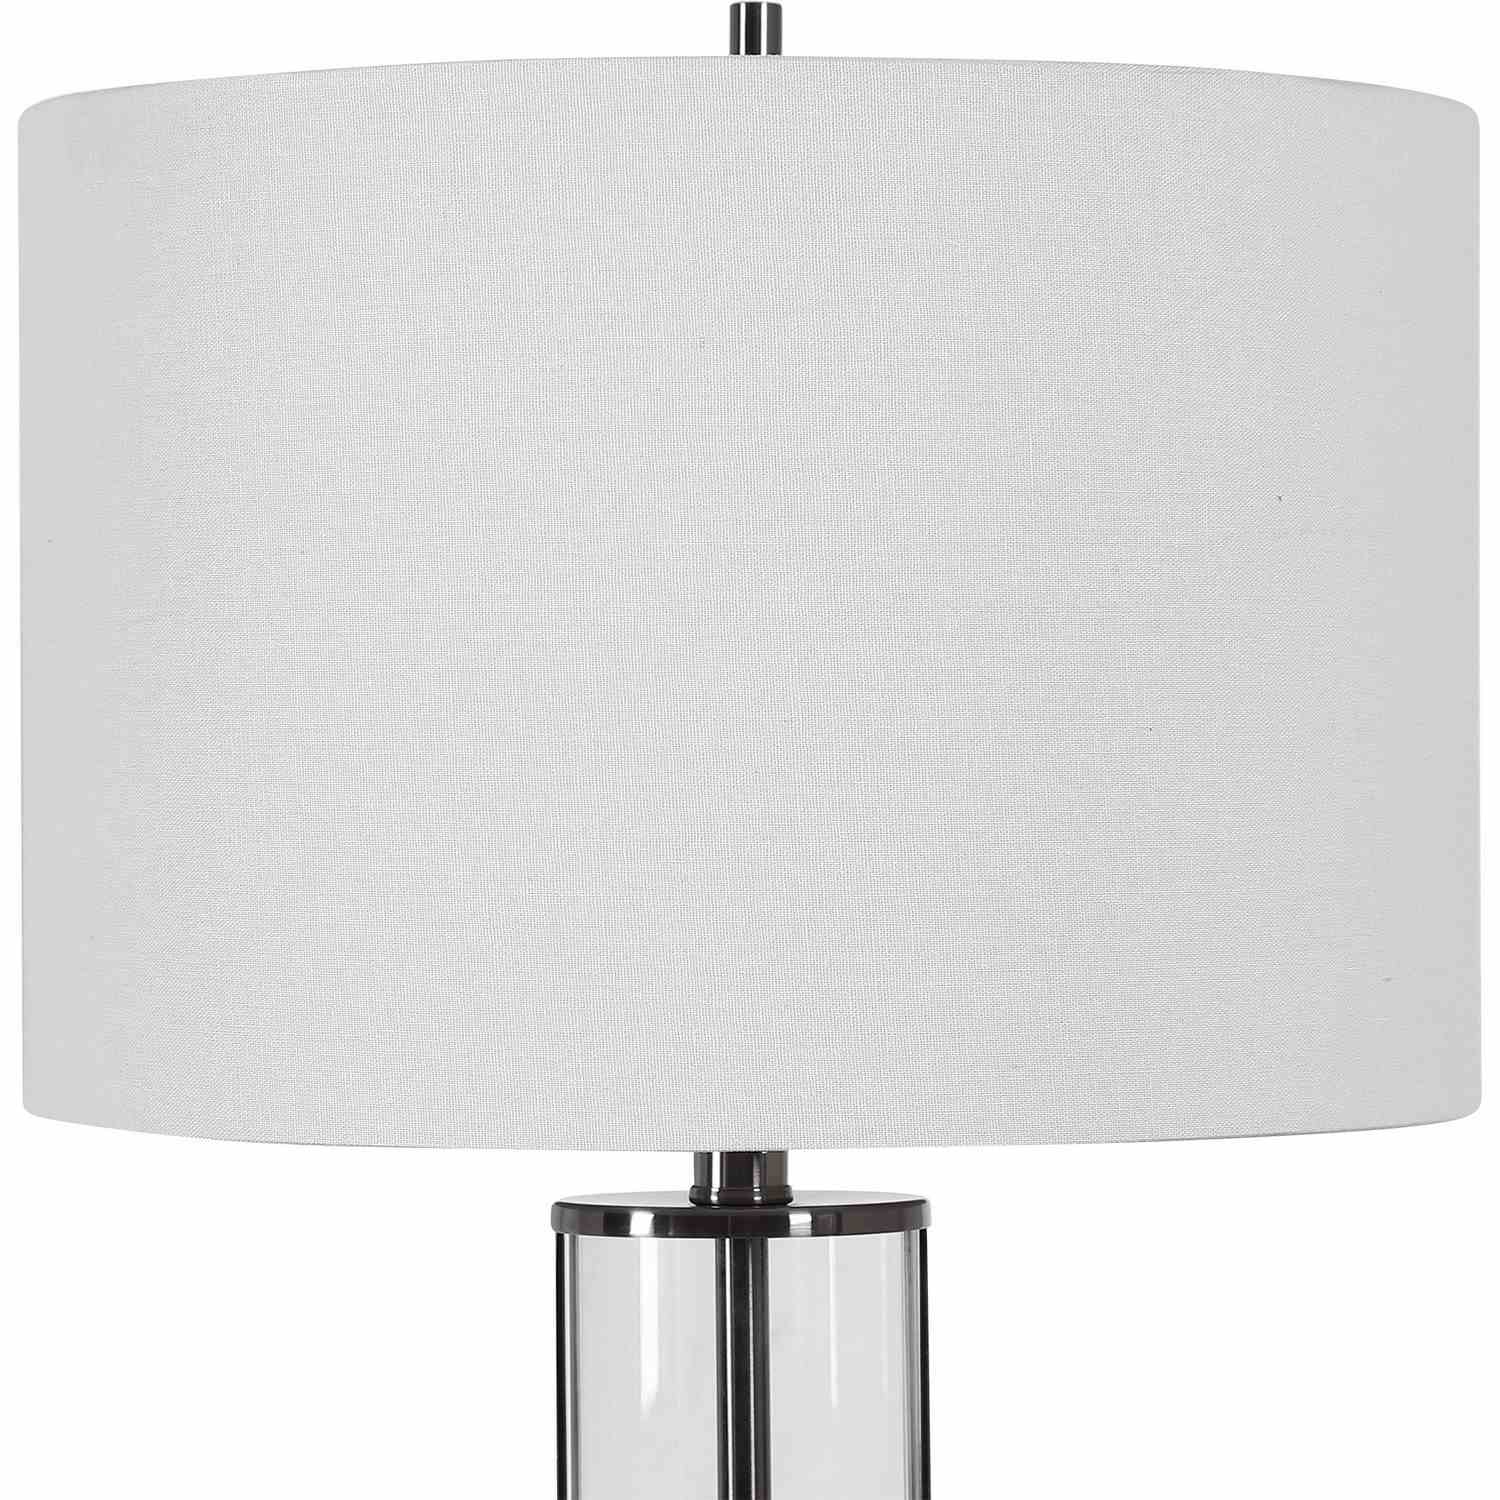 Uttermost W26057-1 Table Lamp - Antique Nickel